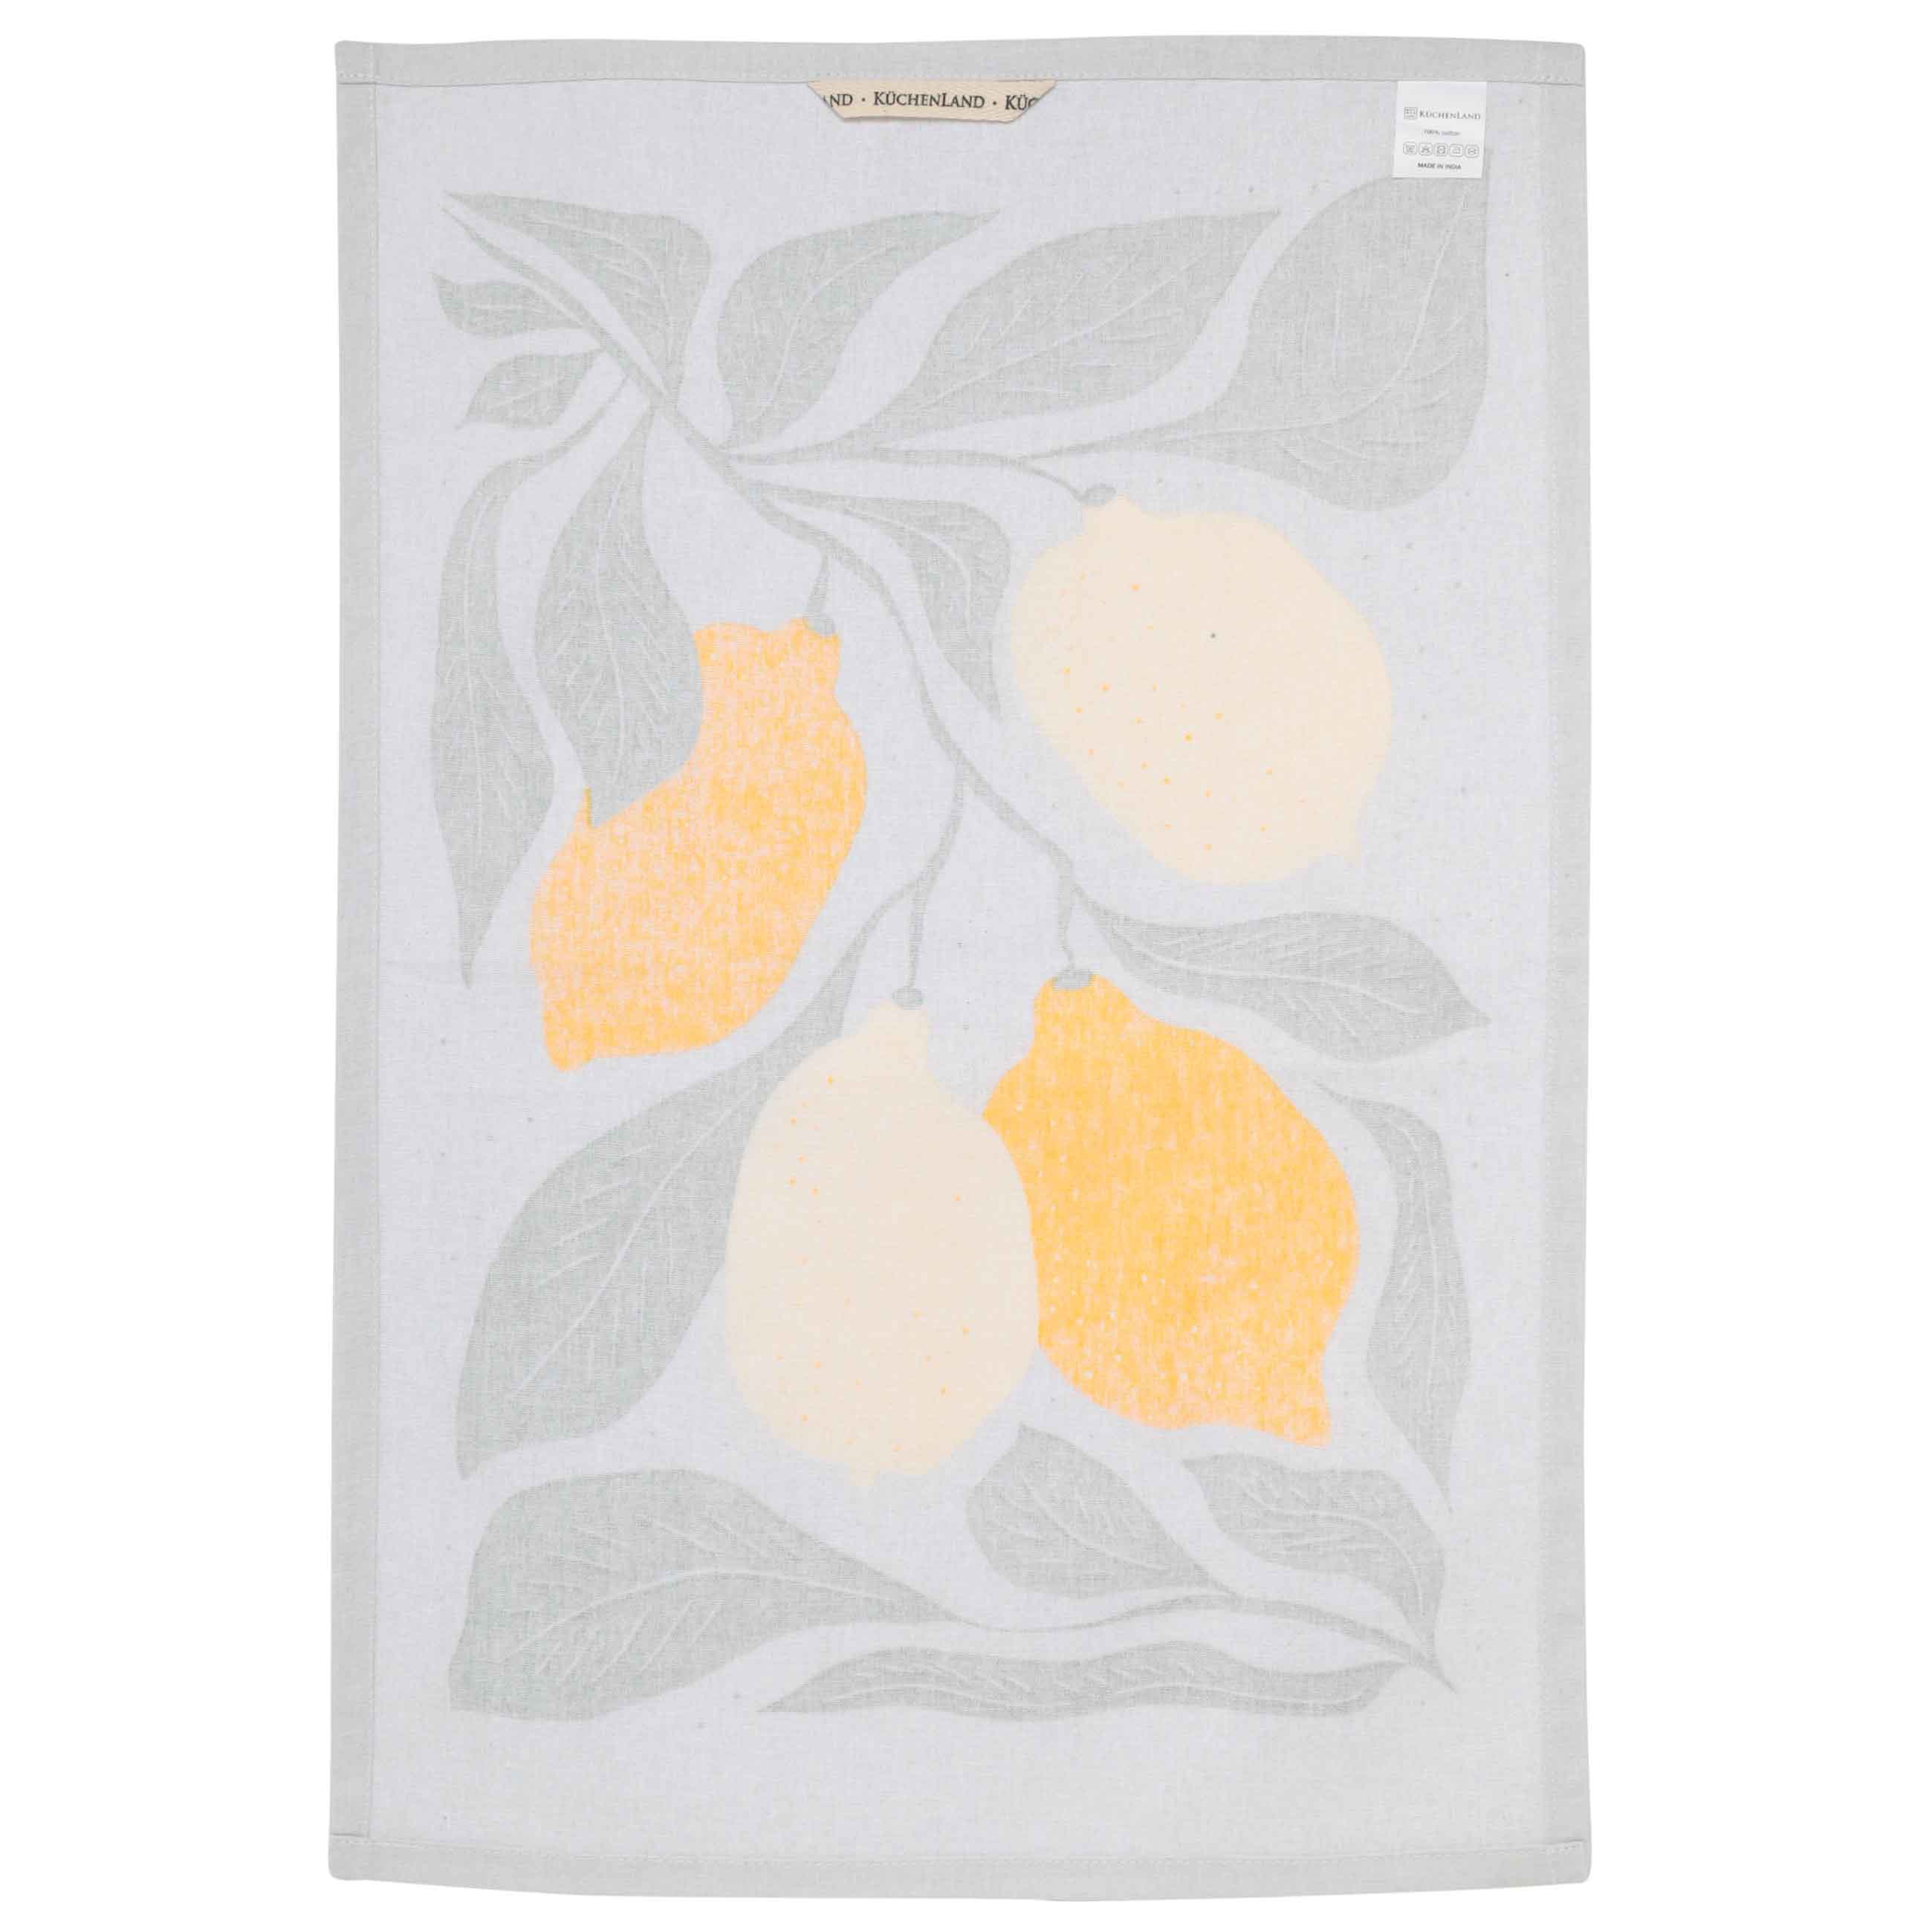 Kitchen towel, 40x60 cm, cotton, gray, Lemons on branches, Sicily in bloom изображение № 2